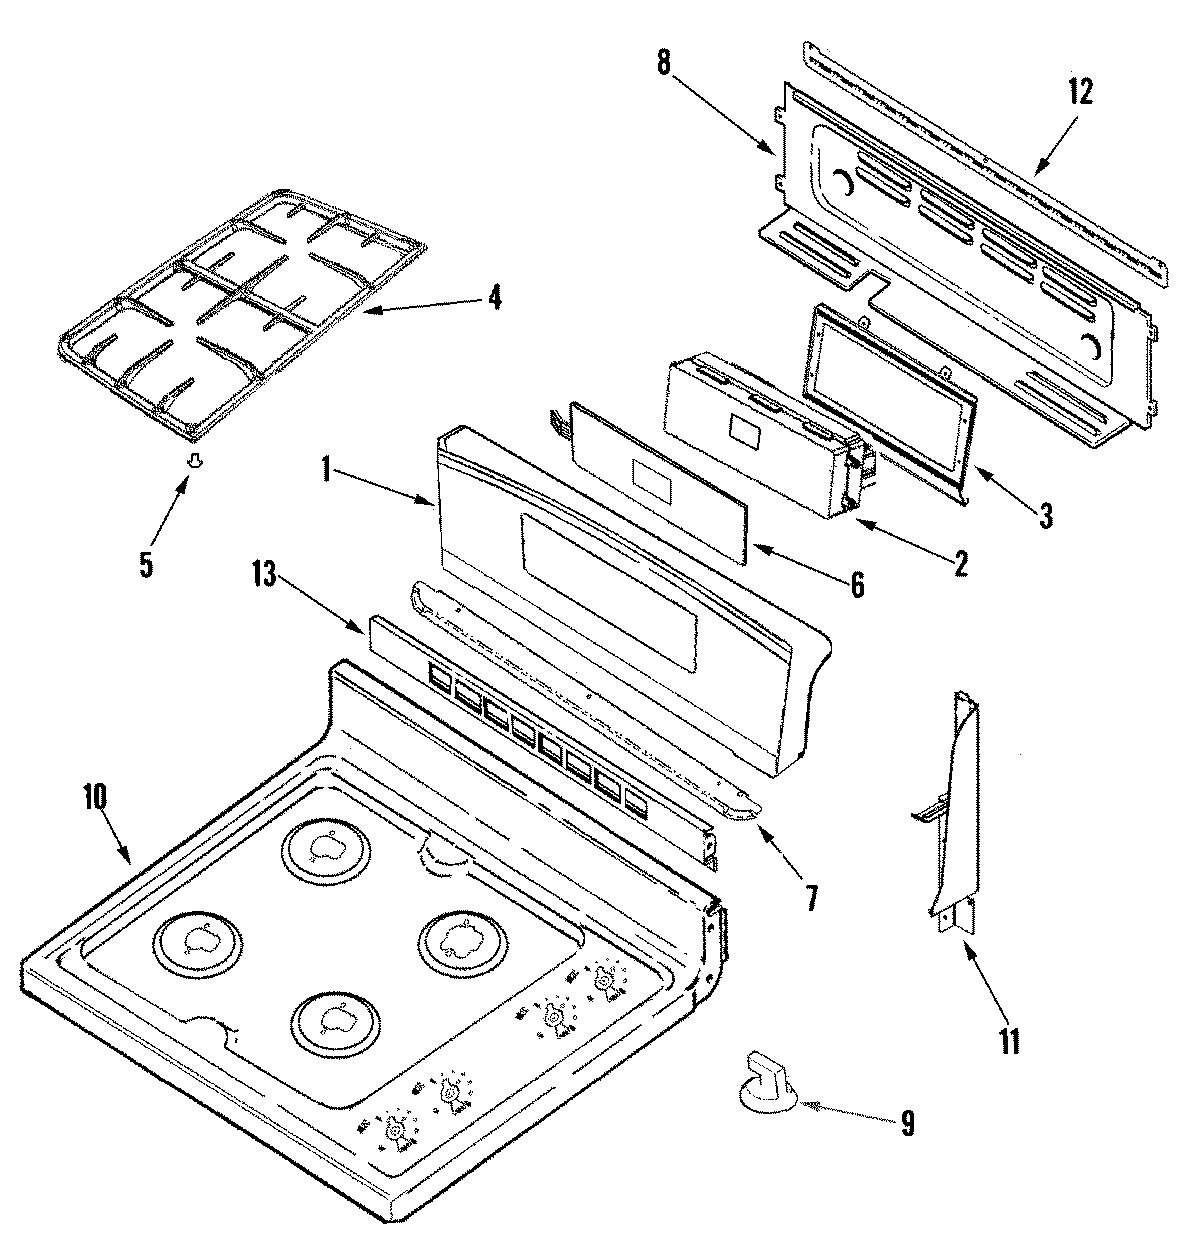 02 - CONTROL PANEL/TOP ASSEMBLY